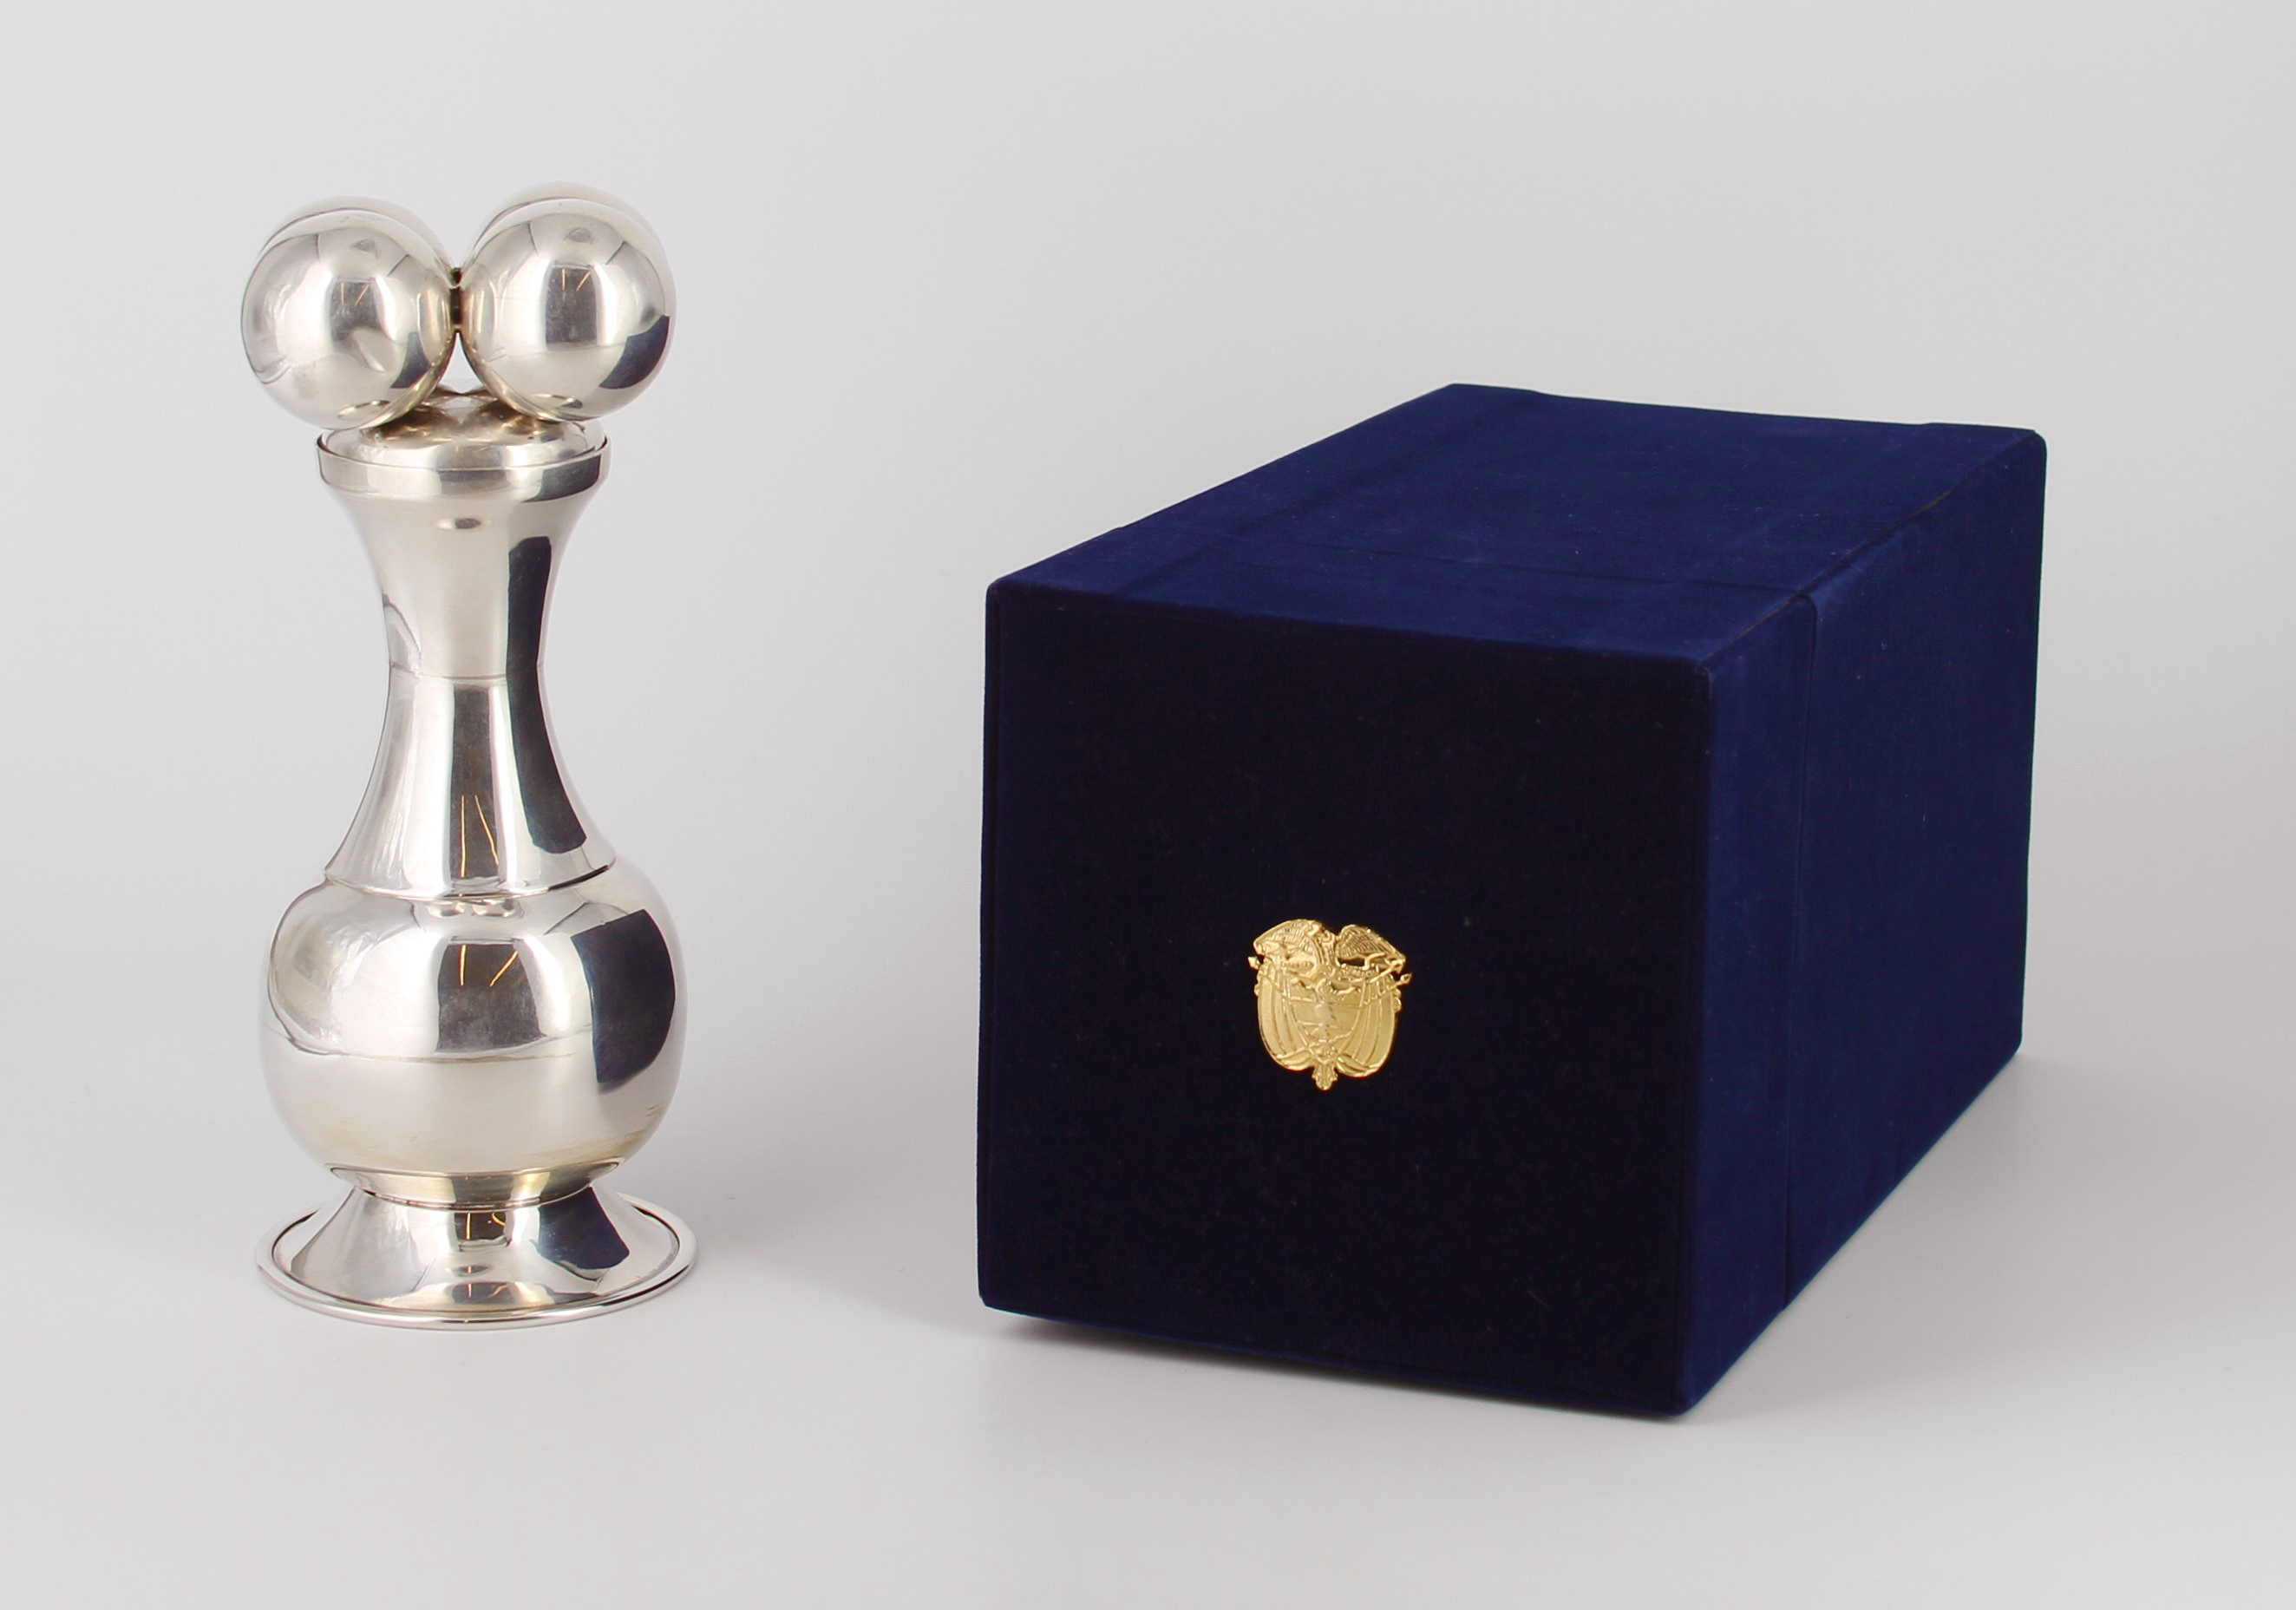 Silver container with removable lid that represents an indigenous artifact; held in a blue velvet hinged box with the coat of arms of Colombia on the lid. Presented to President Bush during a working visit to Washington, D. C. in 2007. Gifted by Alvaro Uribe, President of the Republic of Colombia.